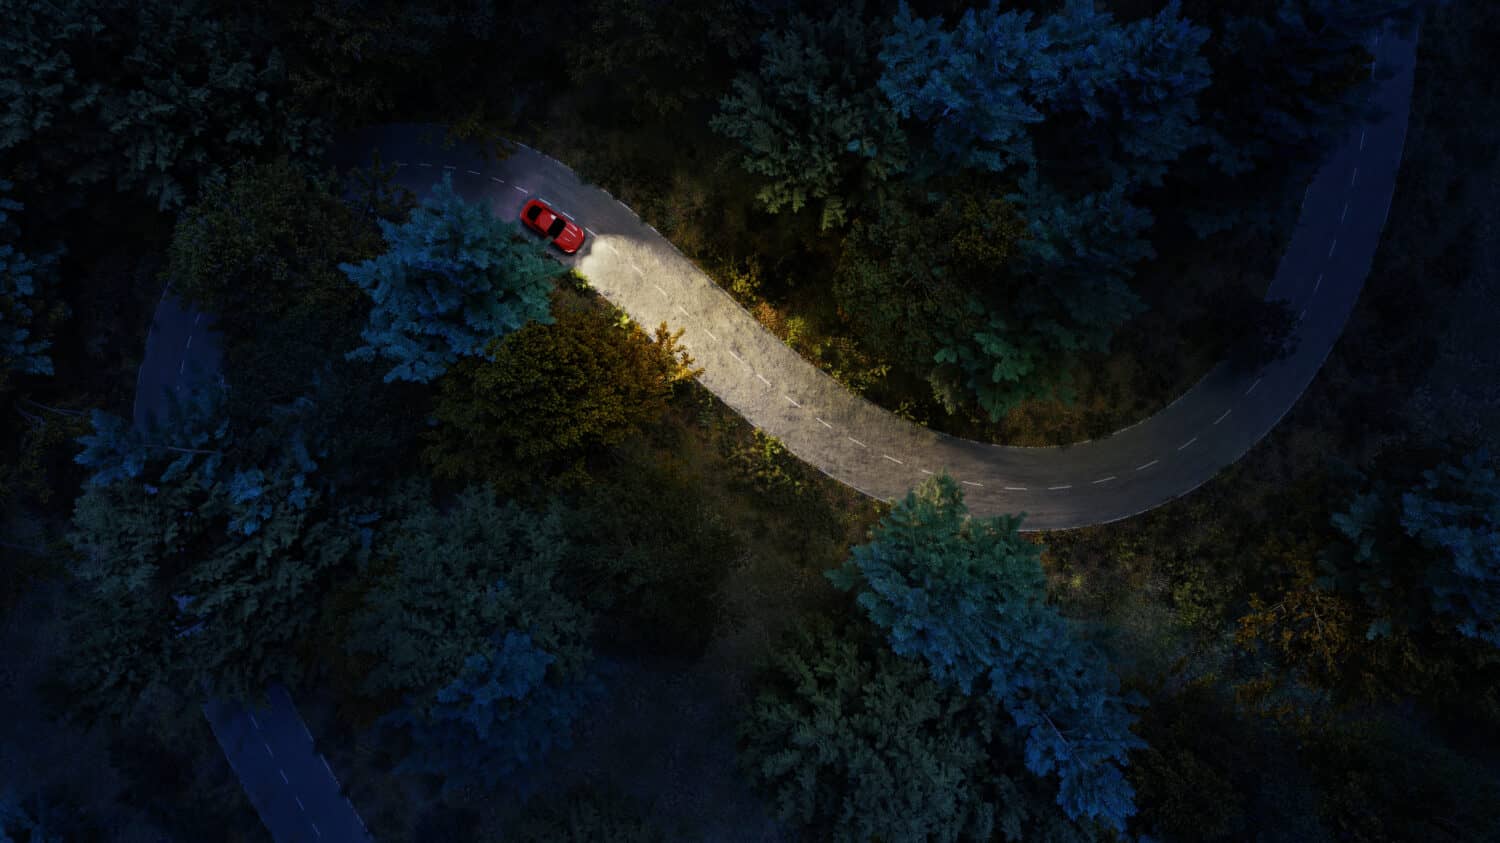 Adventure night road trip in the forest, aerial view of a car headlights on deep jungle road. On The Road Again concept.